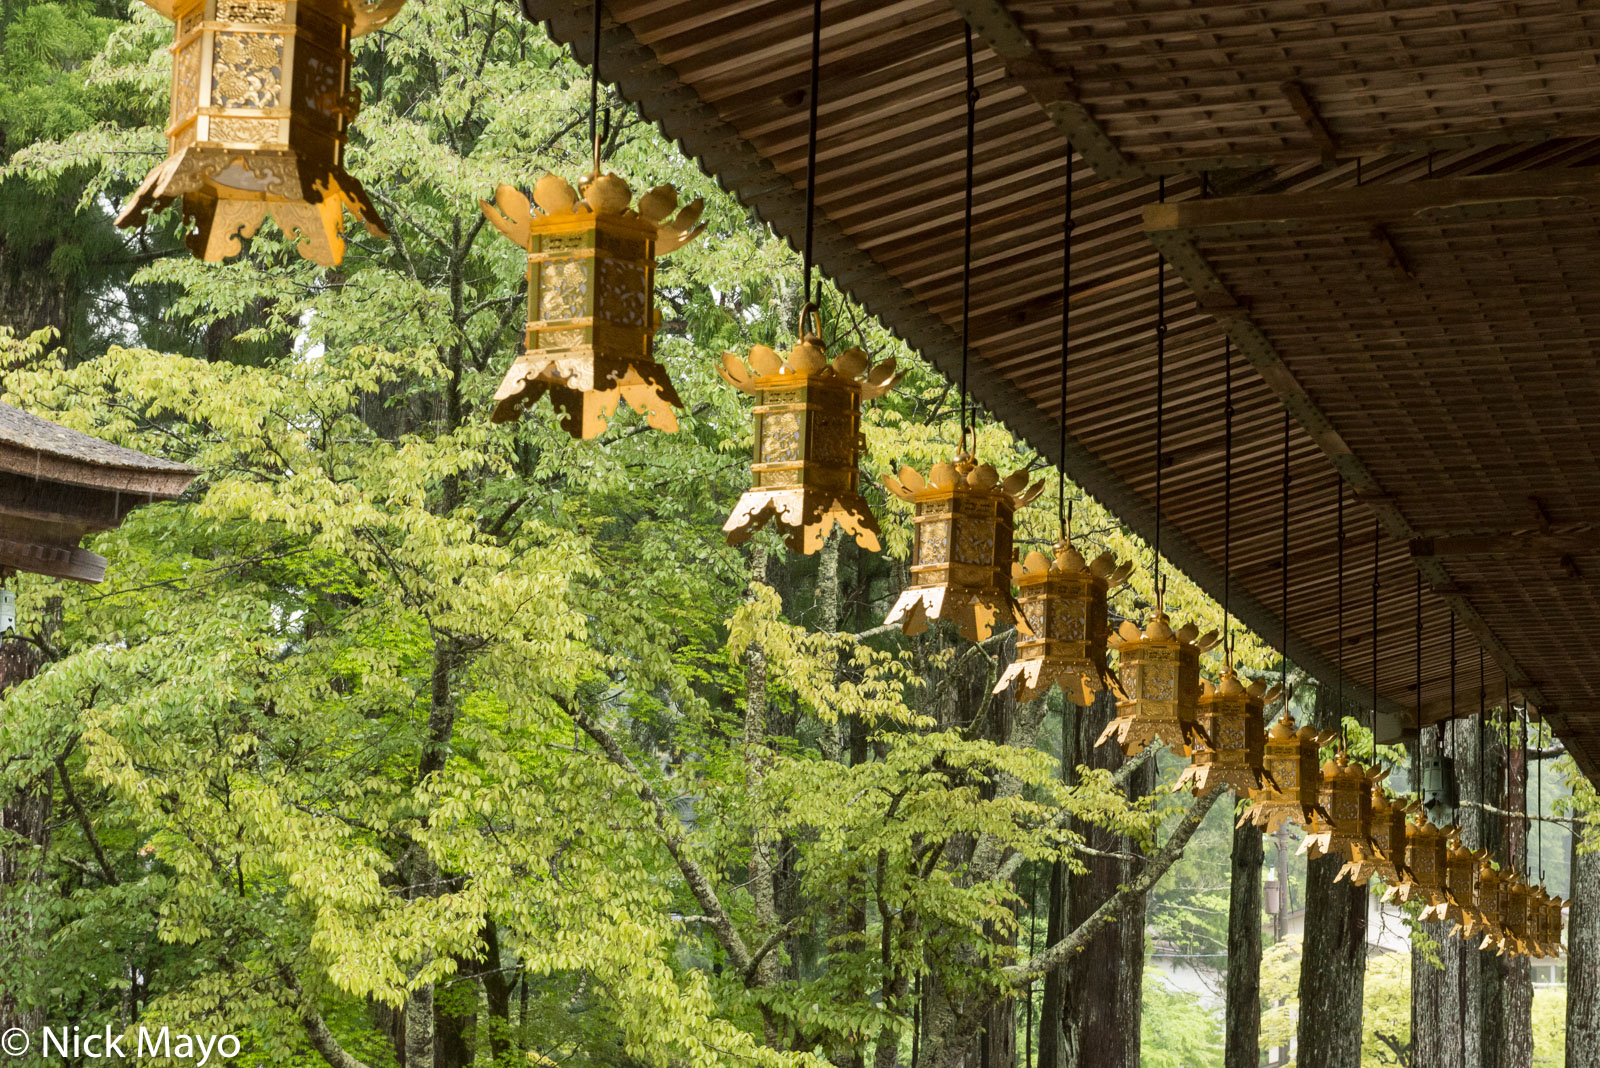 Lanterns hanging from the Miedo hall in the Danjo Garan-on temple complex at Koyasan.